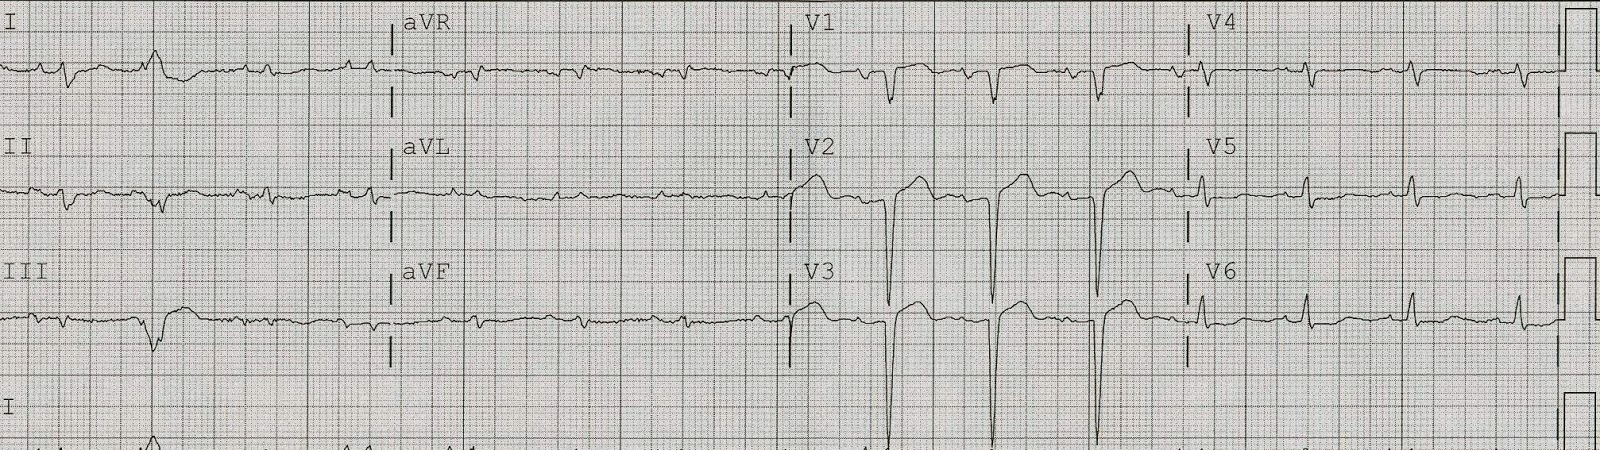 Dr. Smith&#39;s ECG Blog: Left ventricular Aneurysm Morphology Distorted by Right Bundle Branch ...